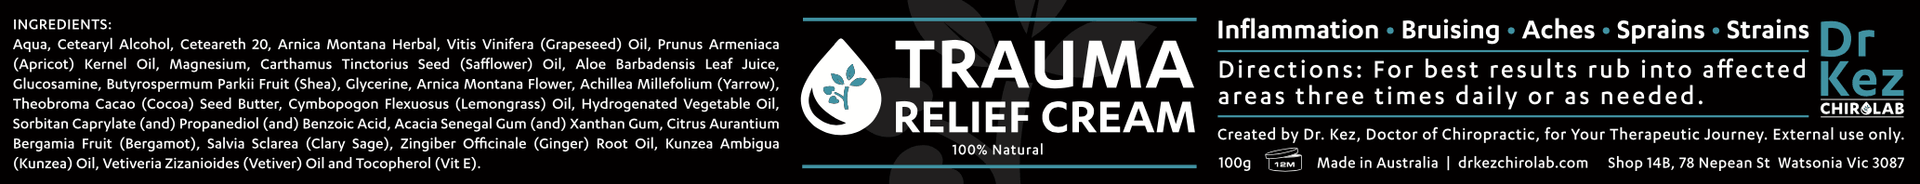 Trauma Relief Cream - Pain Relief Lotion Homeopathic DUO Pack - Dr Kez Chirolab 